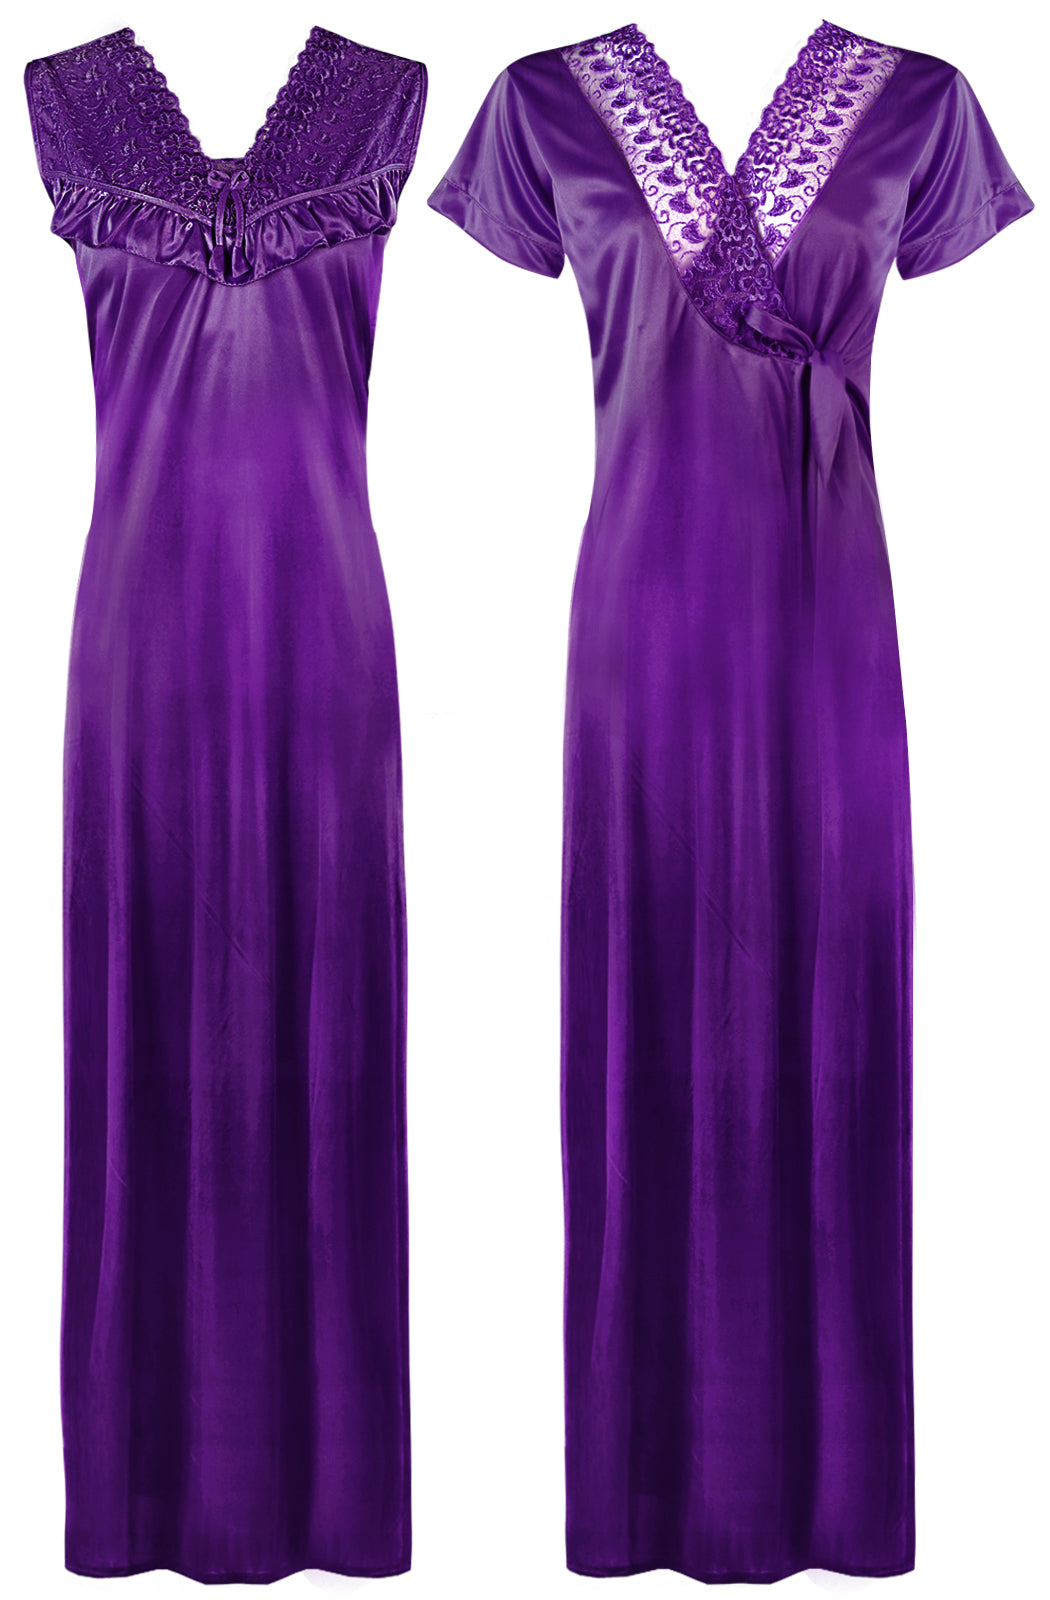 Purple 2 / One Size Women Satin Long Nighty and Housecoat The Orange Tags